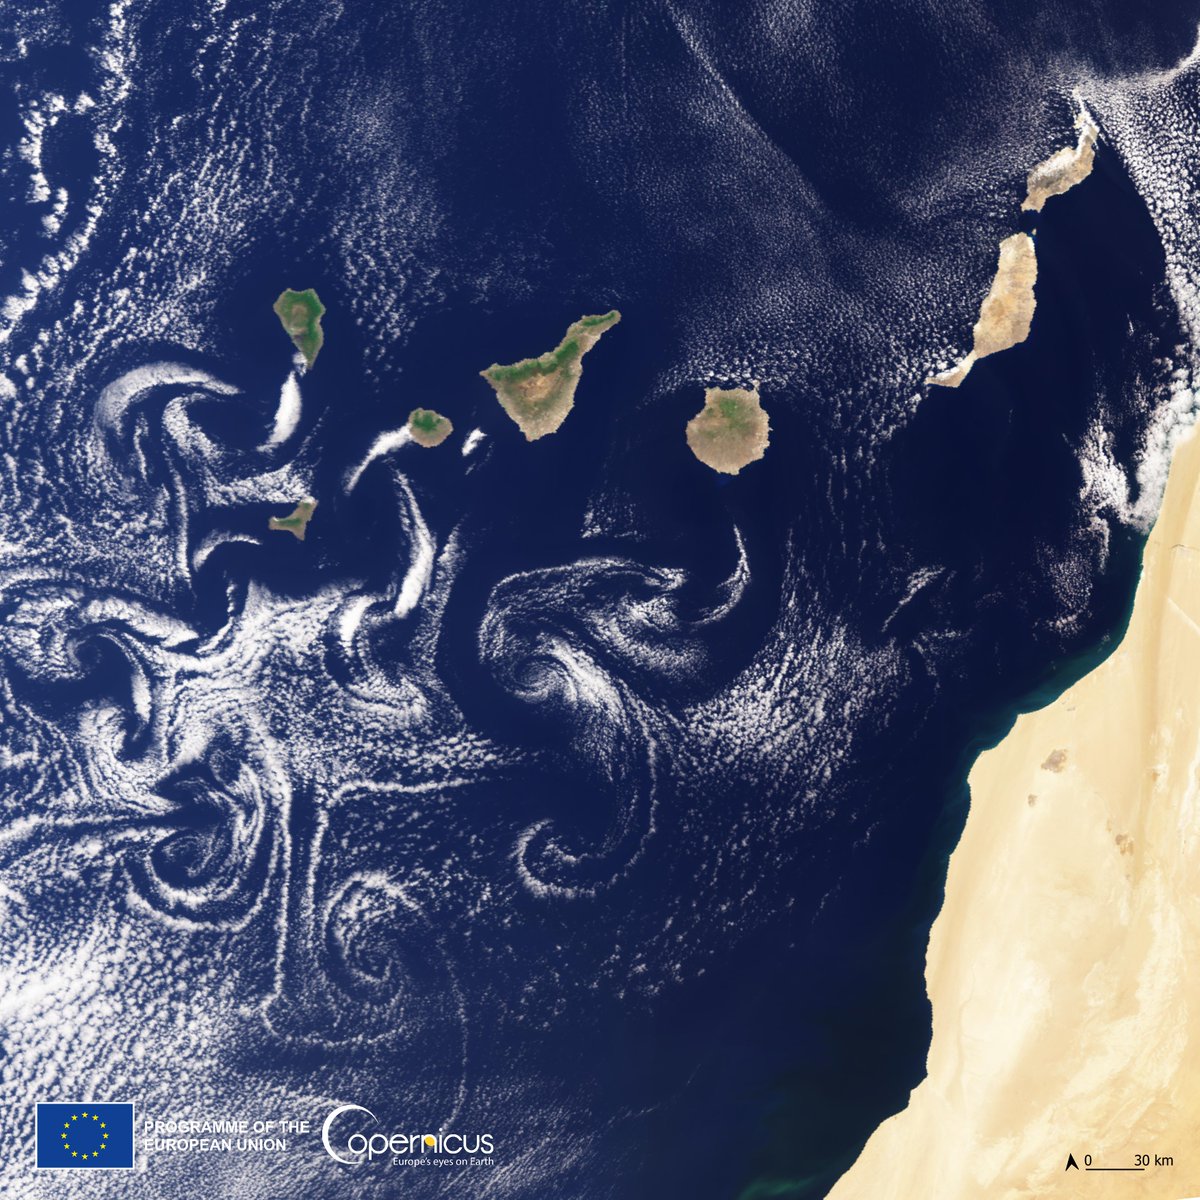 Let's start the weekend with a fascinating image!

Von Kármán vortex streets can regularly be observed over the Canary Islands🇪🇸,  generating lovely swirls of clouds 🌬️🌀

On 16 June #Copernicus #Sentinel3🇪🇺🛰️ captured  these hypnotic vortices southwest of the archipelago